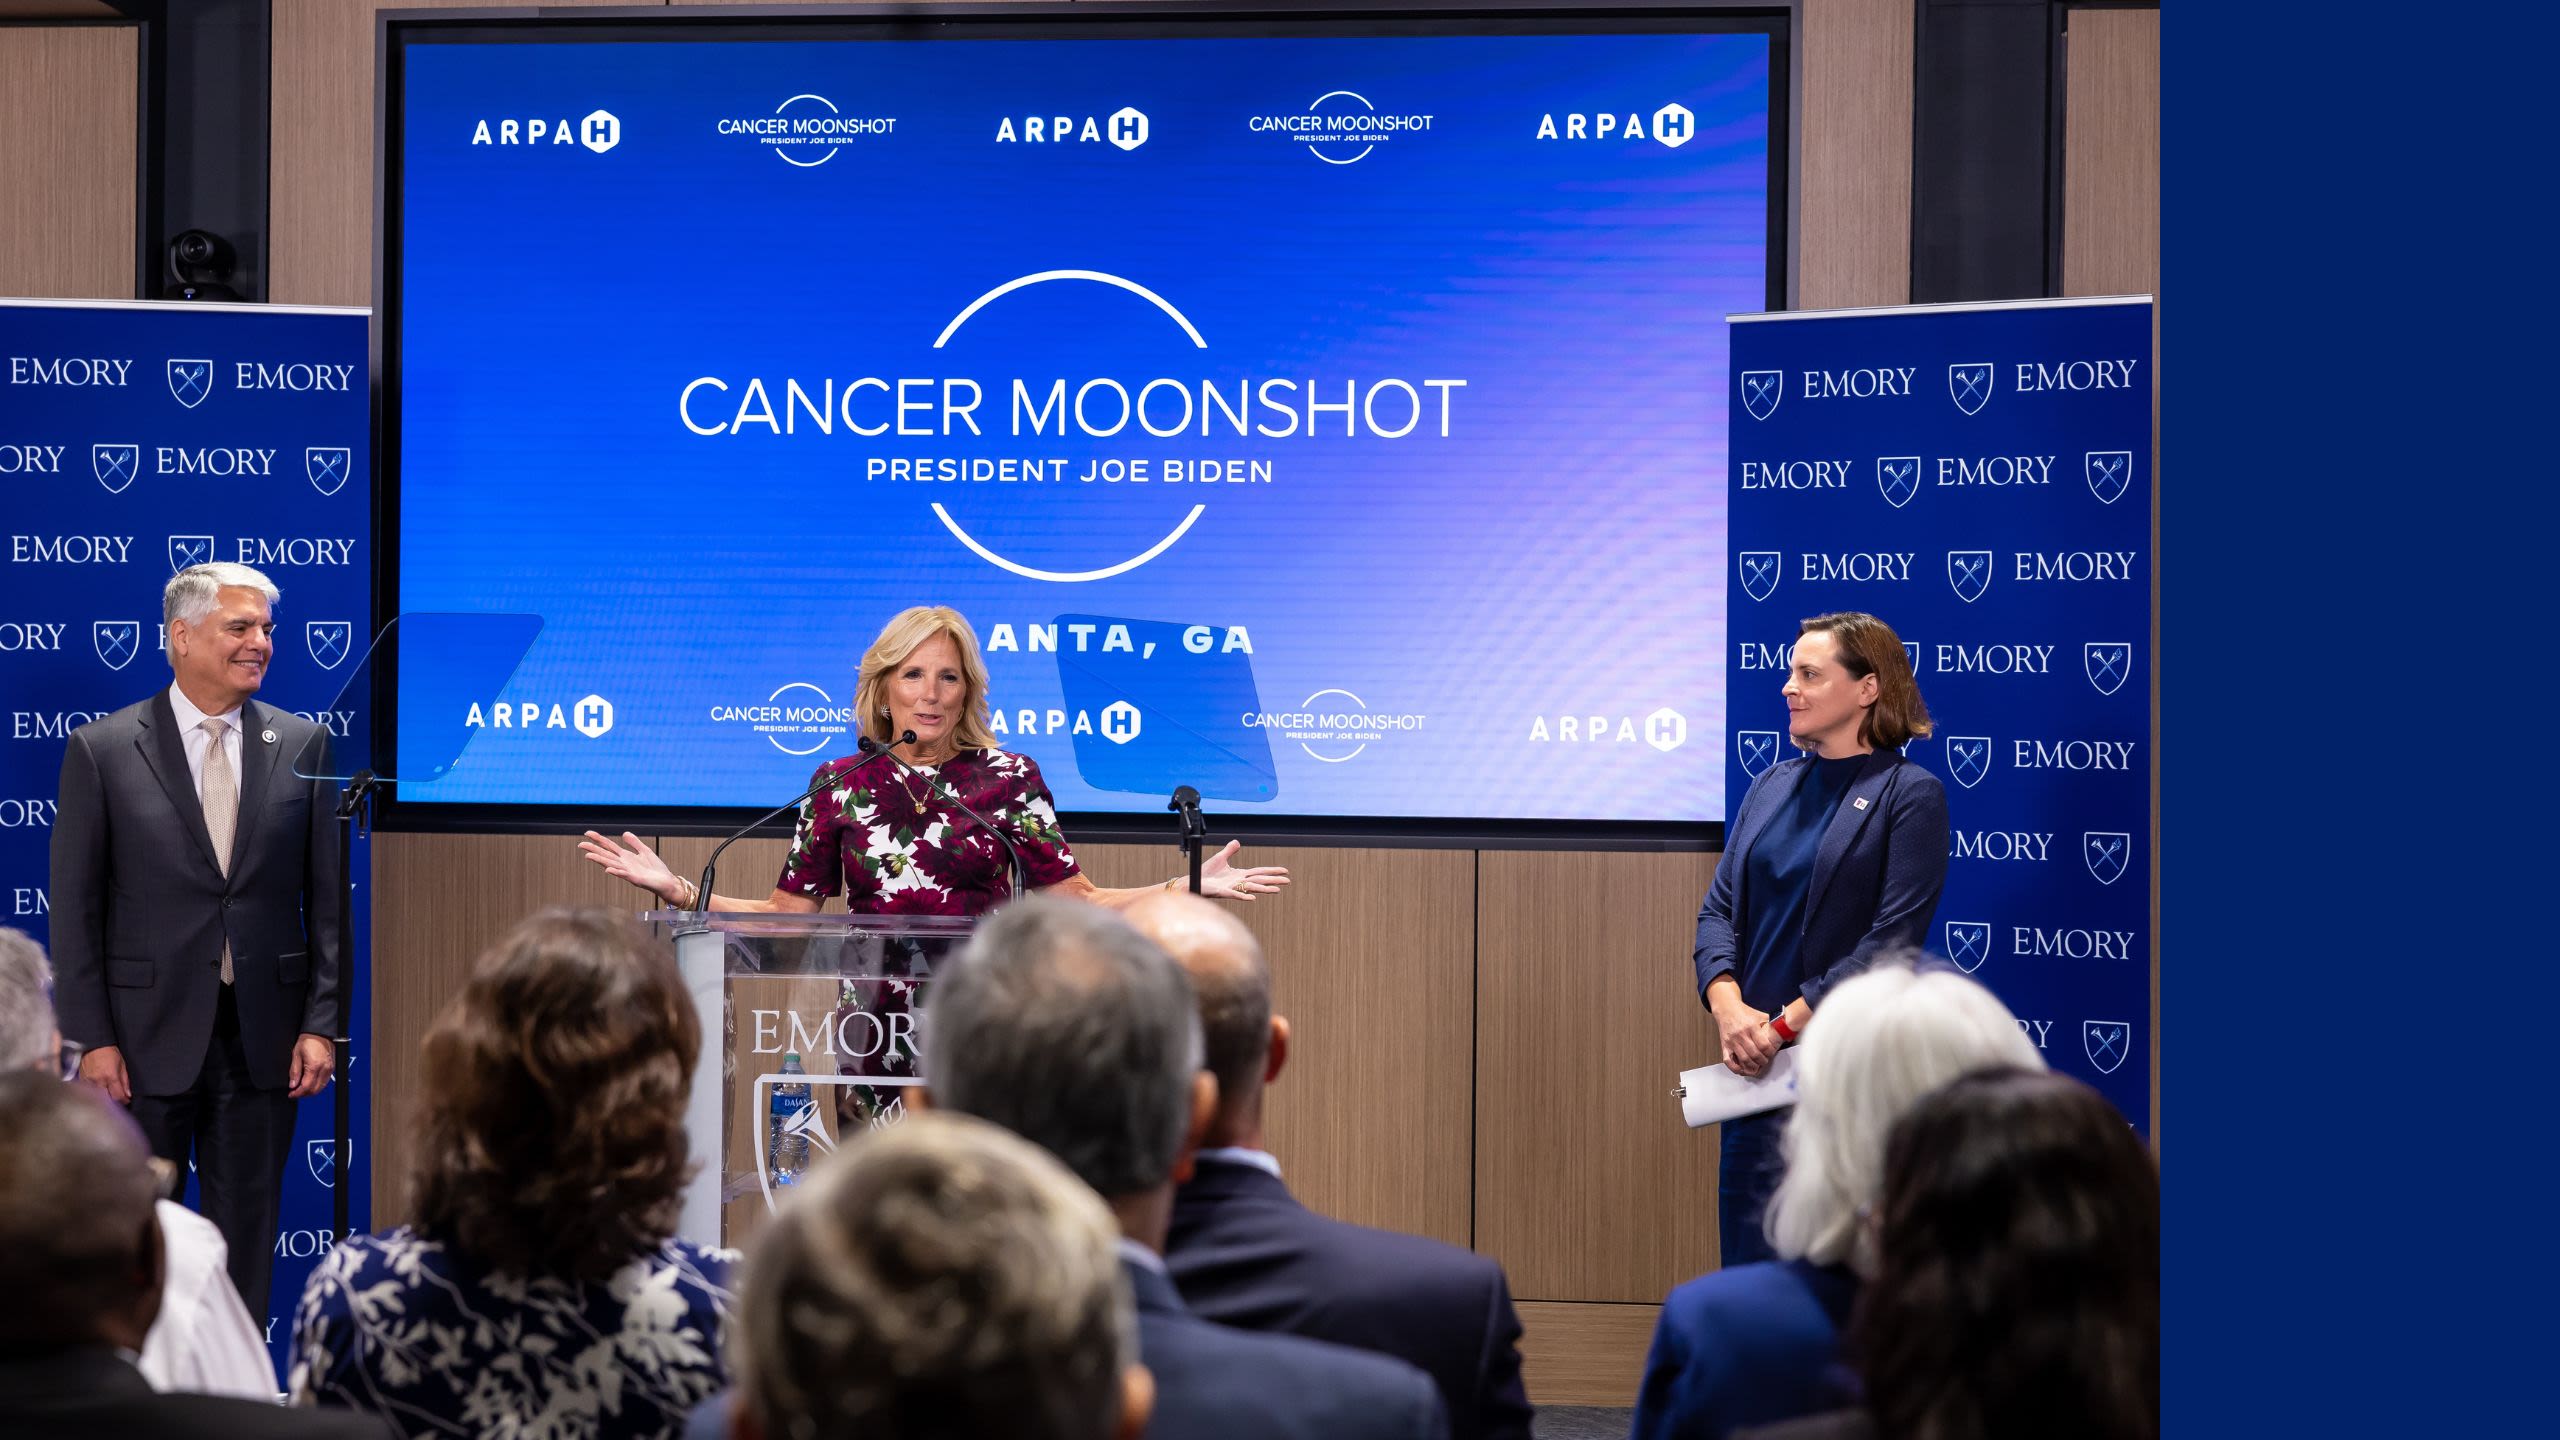 First lady Jill Biden visited Emory on Sept. 15 to learn about Philip Santangelo’s ground- breaking research aiming to tune the immune system to fight cancer and other diseases.